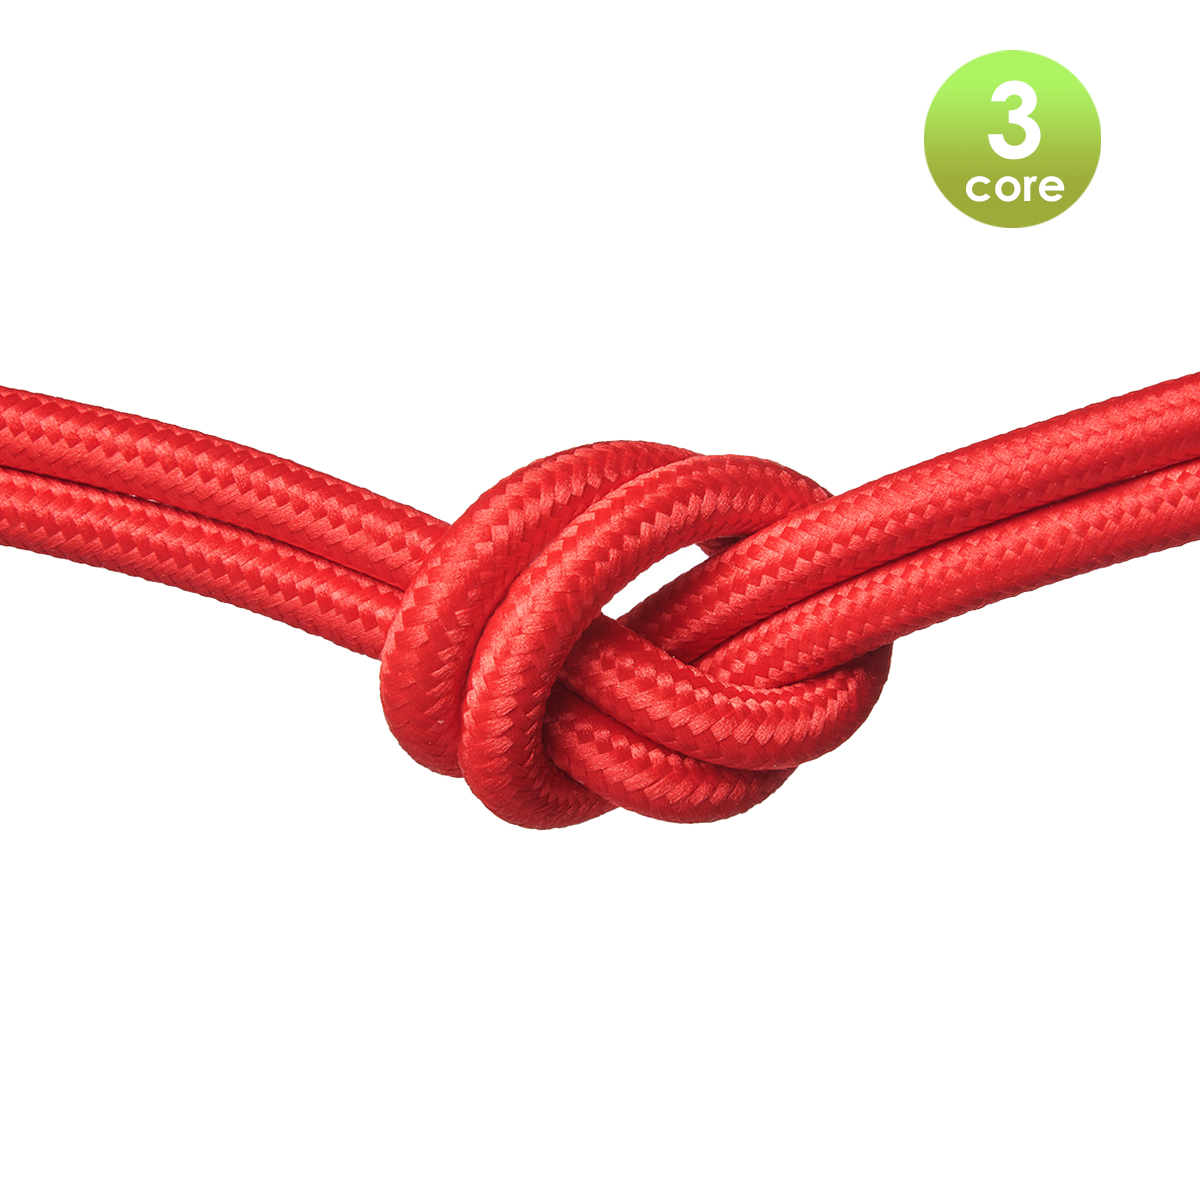 Tangla lighting - TLCB01008RD - 3c - Fabric cable 3 core - in red